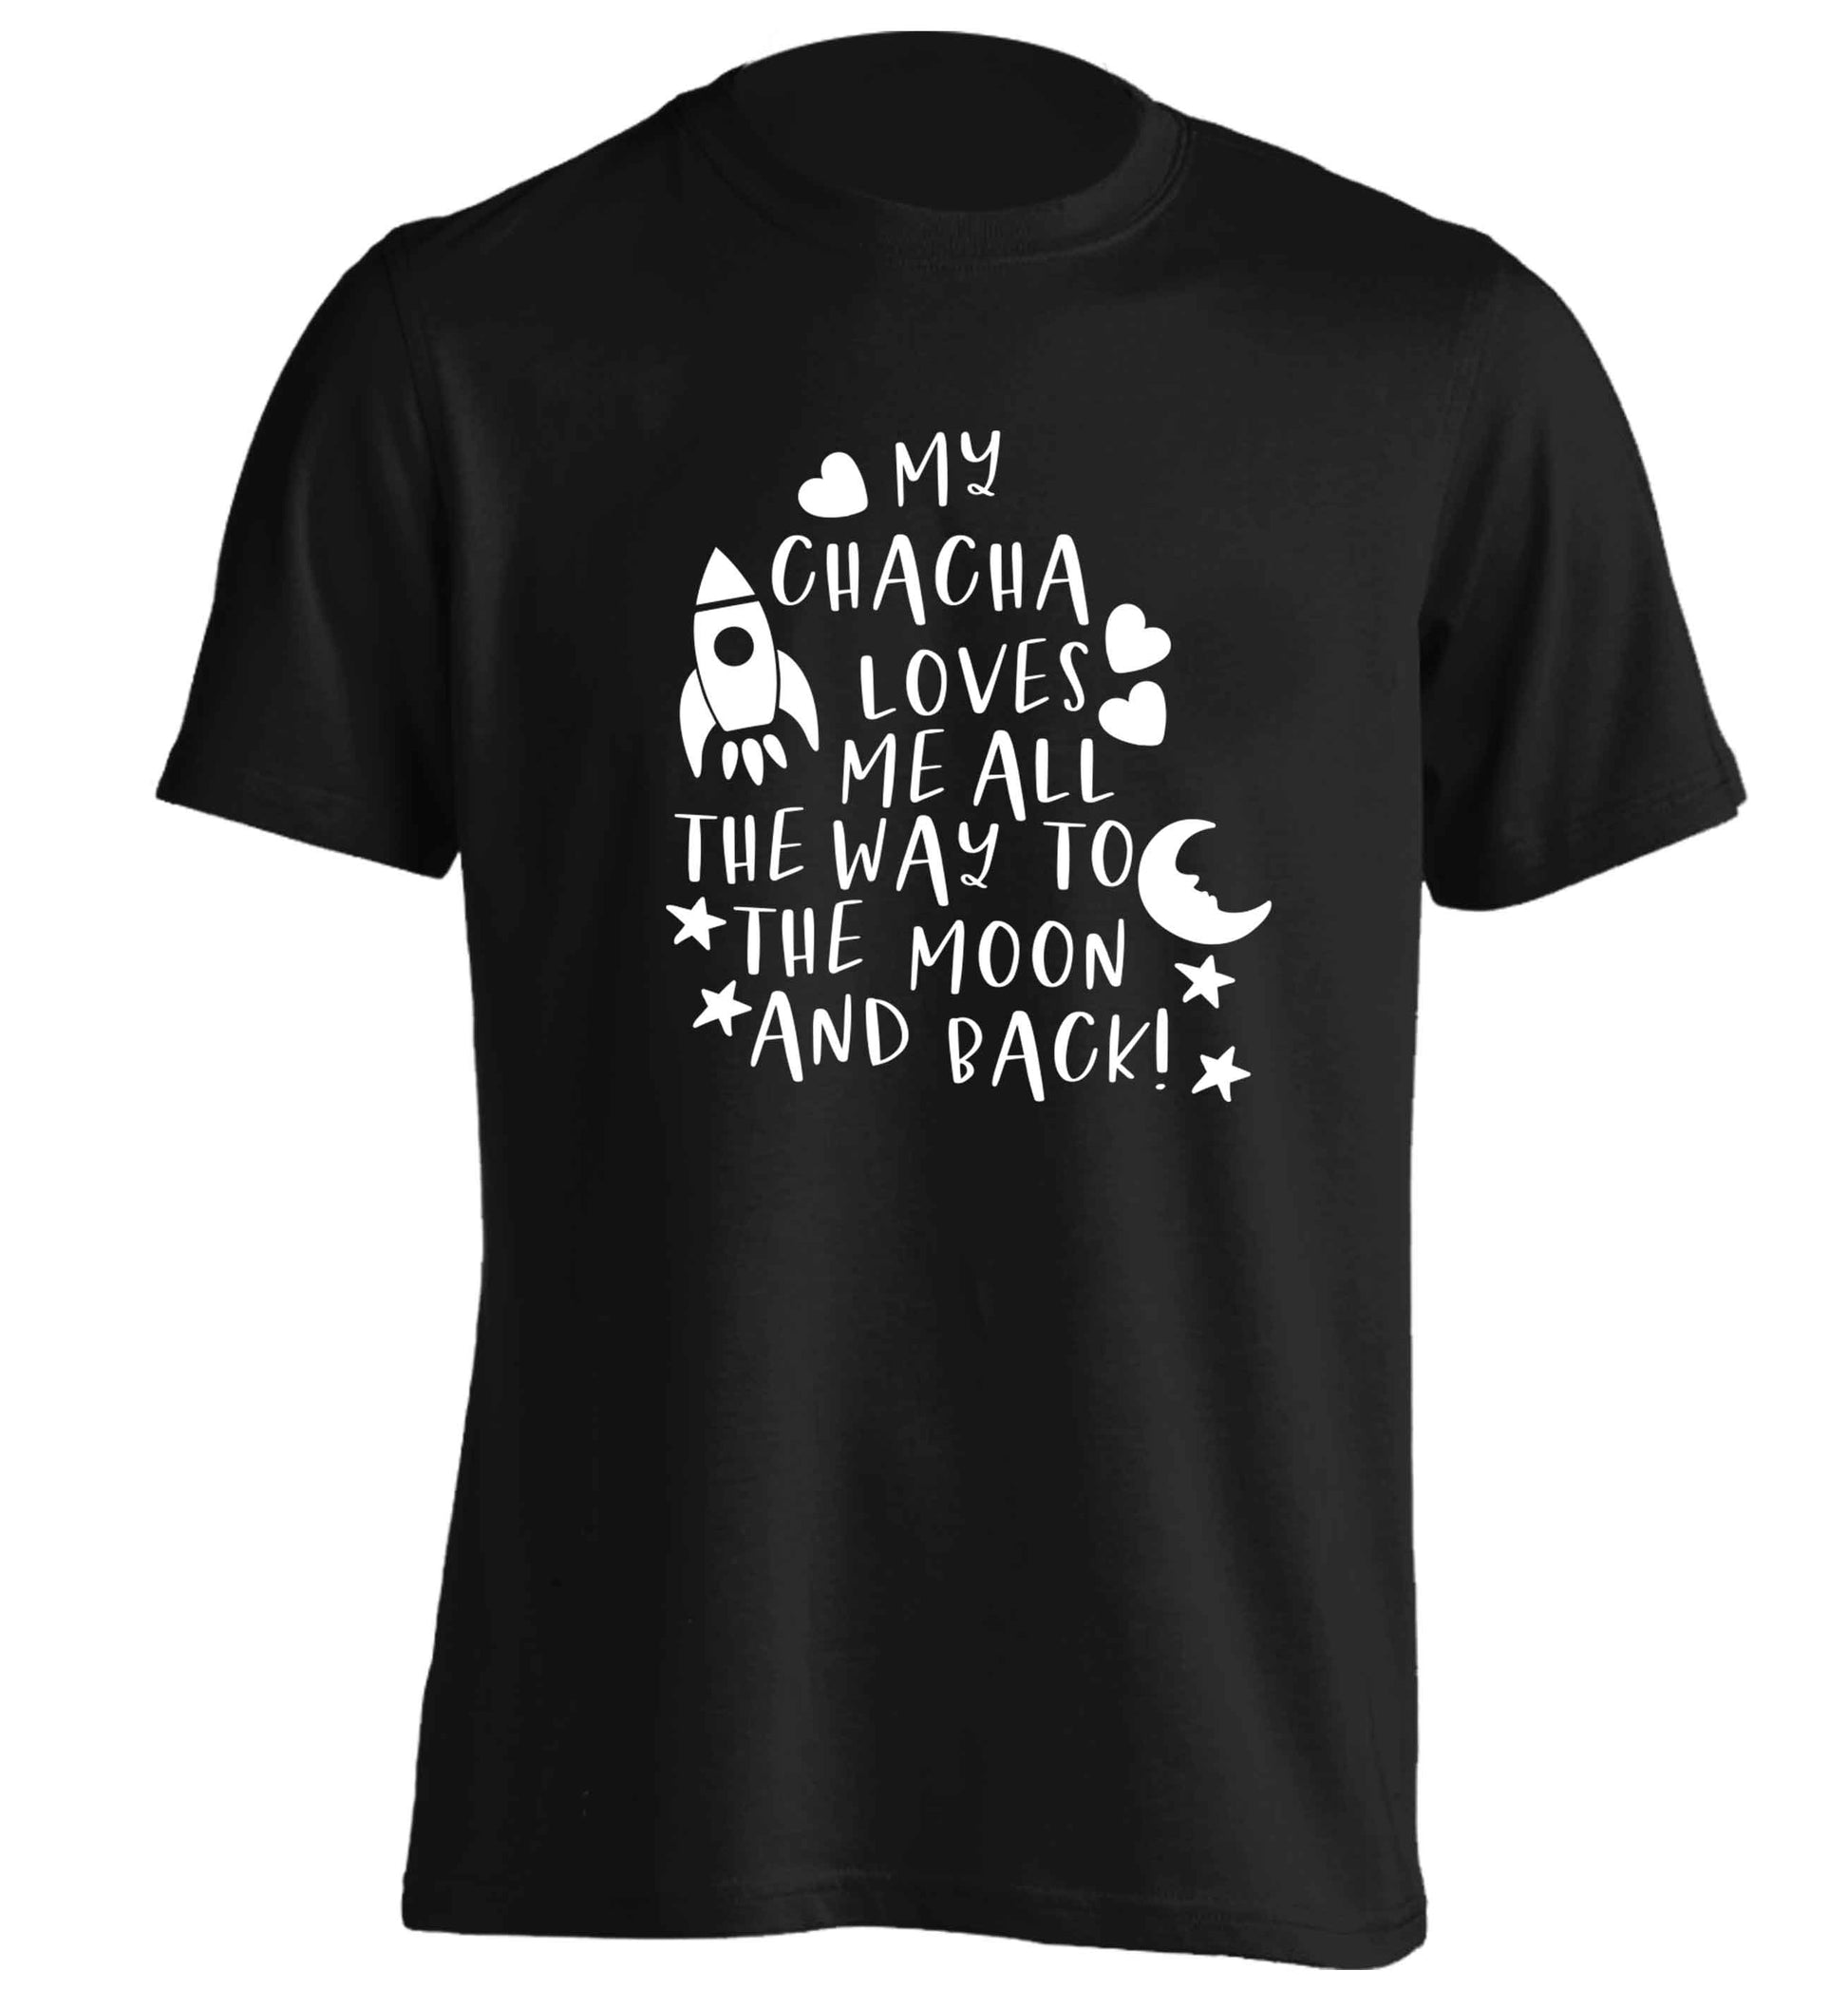 My chacha loves me all the way to the moon and back adults unisex black Tshirt 2XL